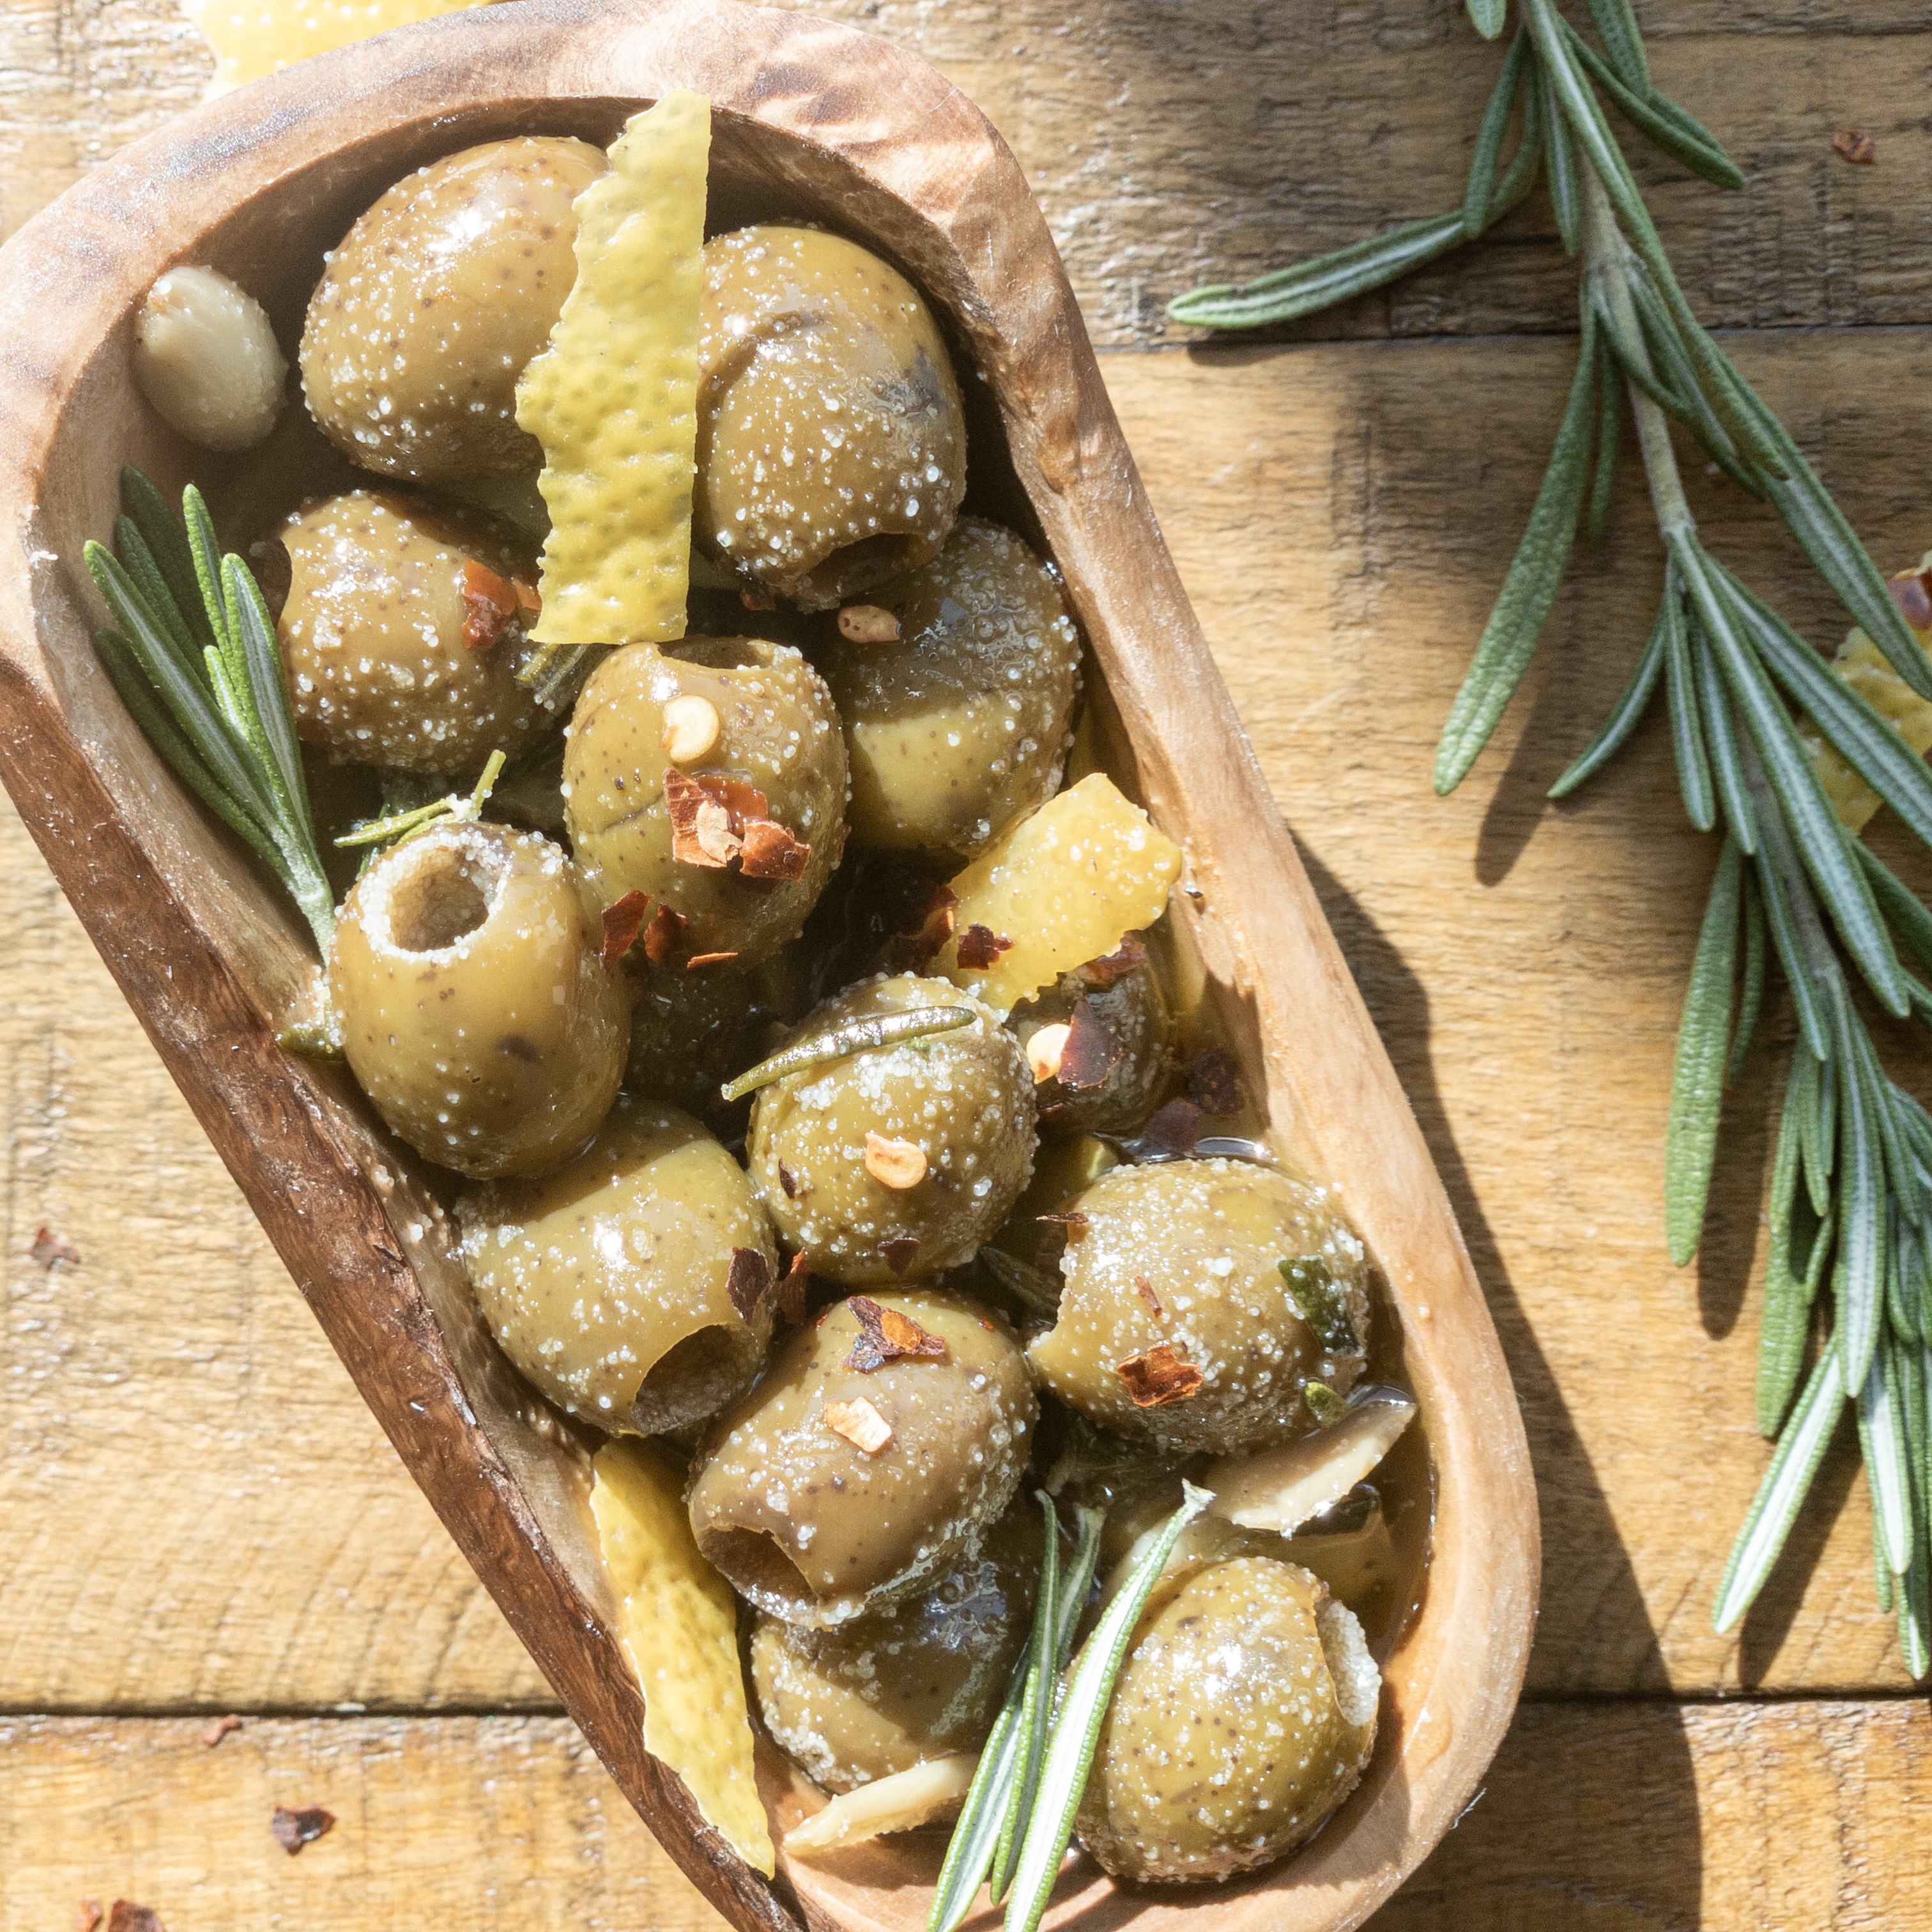 Citrus and herb marinated olives